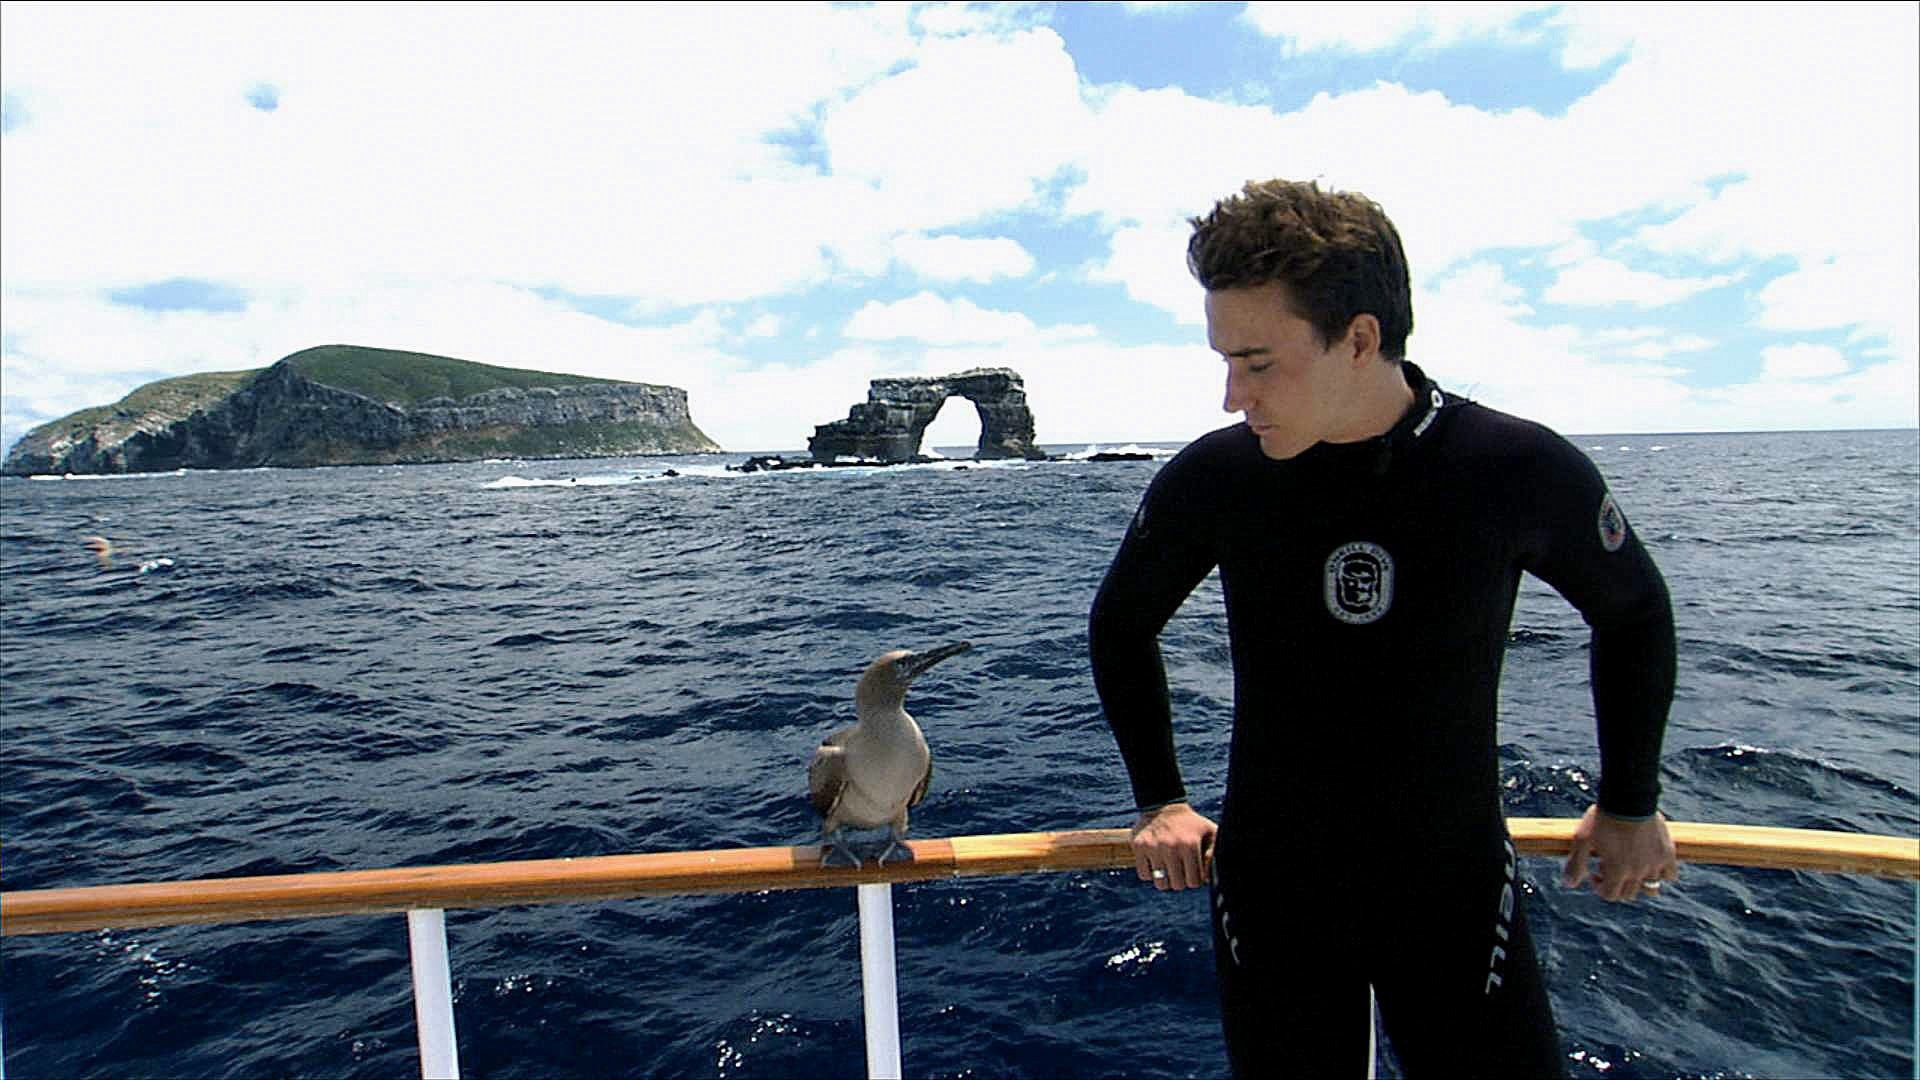 Filmmaker Rob Stewart’s death wasn’t an anomaly: the real risks of scuba diving